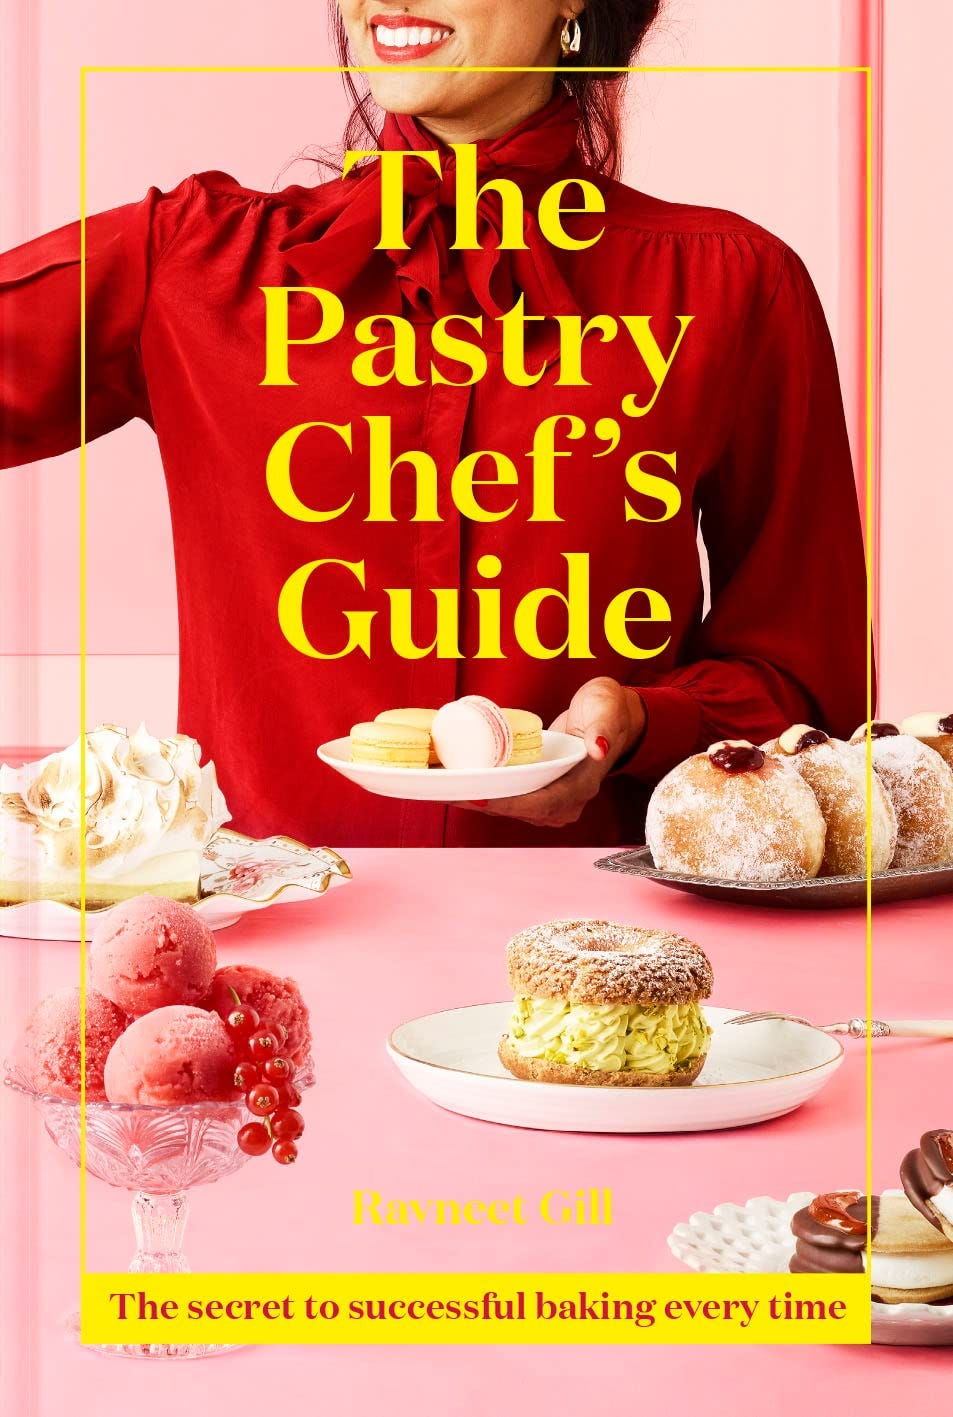 The Pastry Chef's Guide: The secret to successful baking every time:  Amazon.co.uk: Gill, Ravneet: 9781911641513: Books